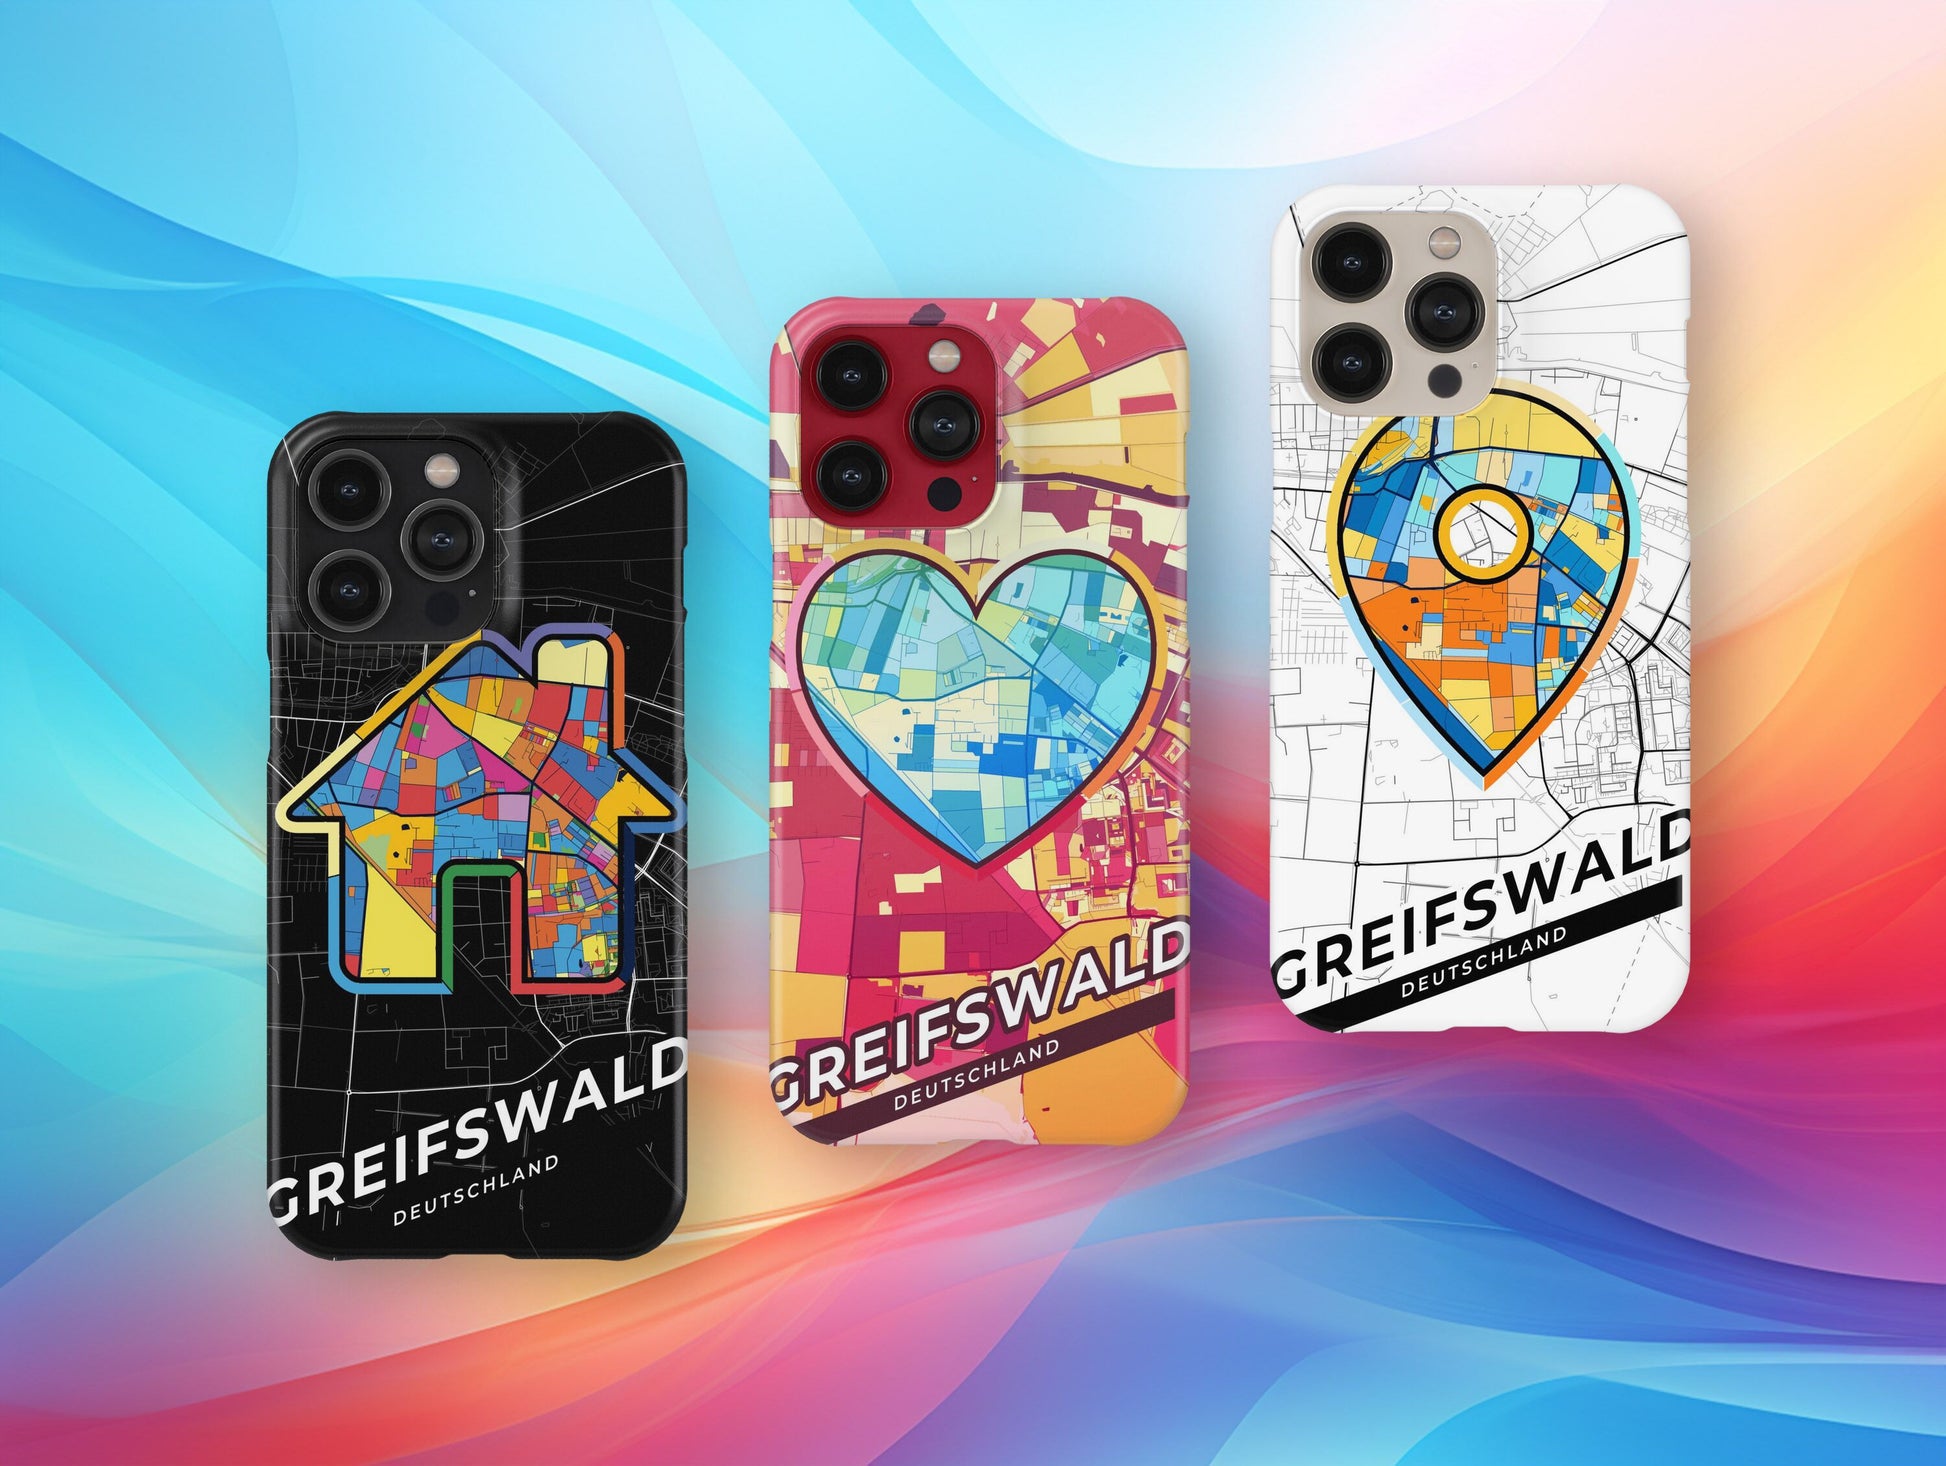 Greifswald Deutschland slim phone case with colorful icon. Birthday, wedding or housewarming gift. Couple match cases.